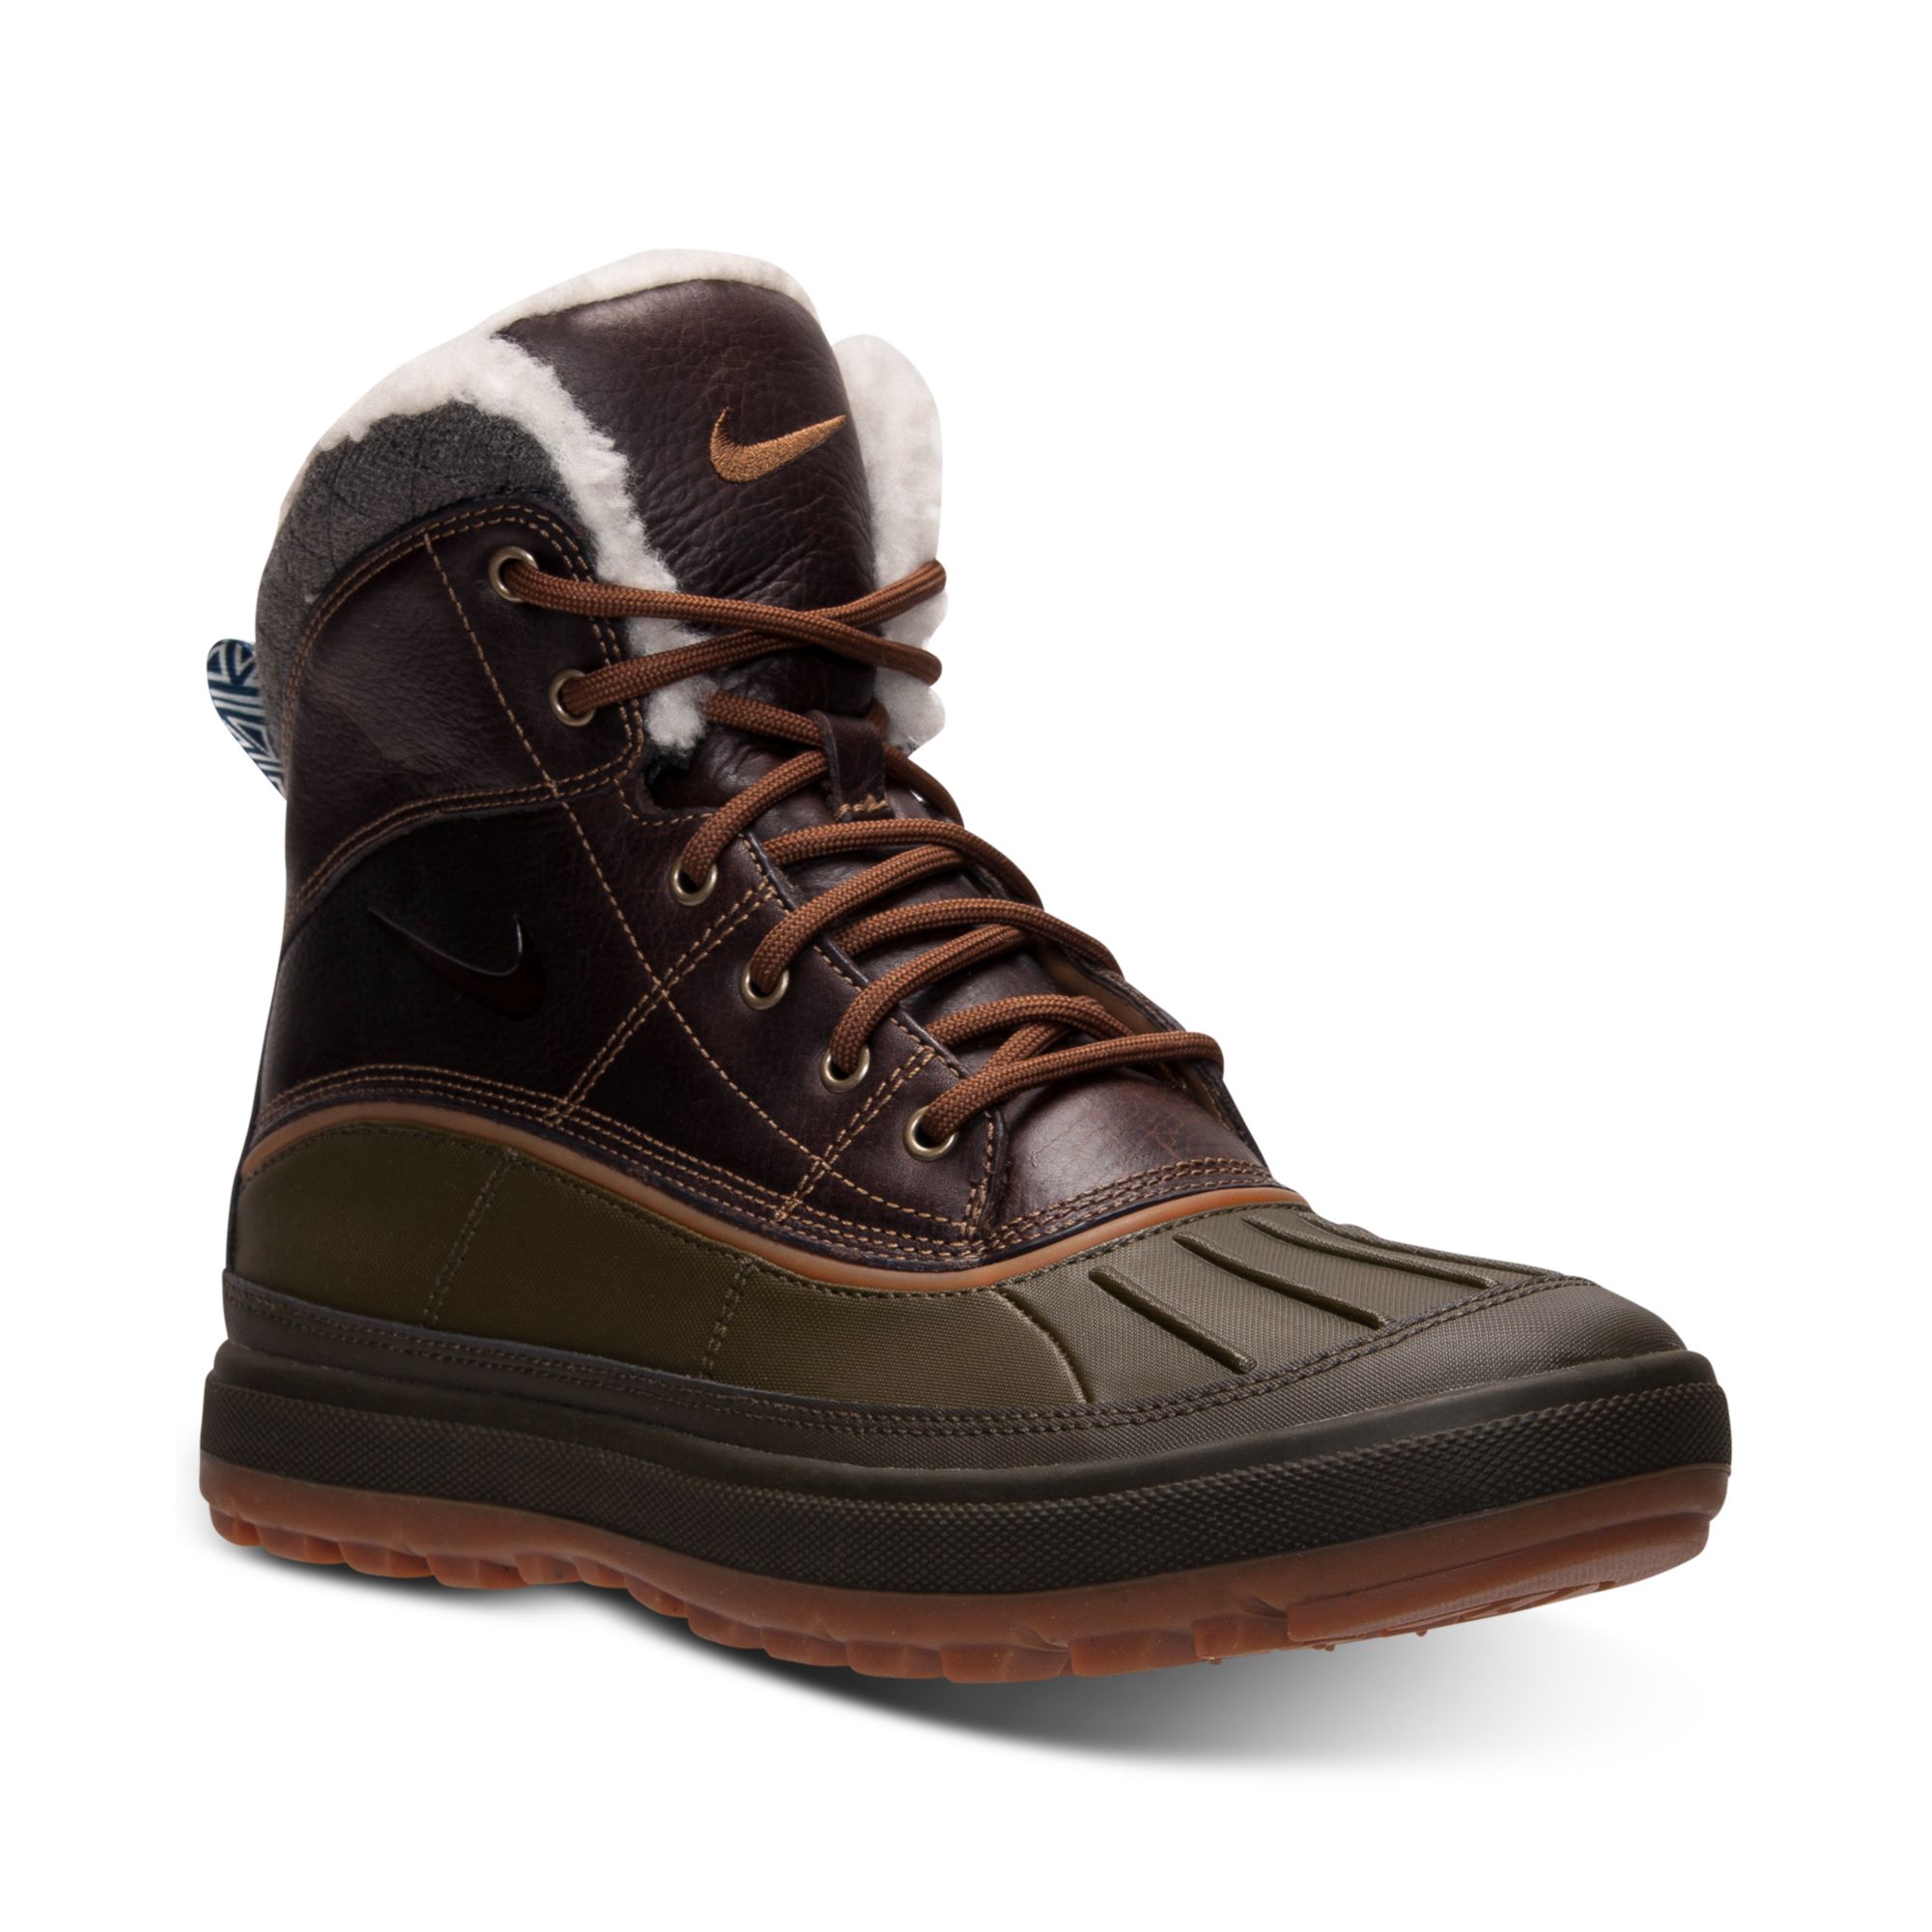 Nike Mens Woodside Ii Boots From Finish Line in Black/Black (Black) for